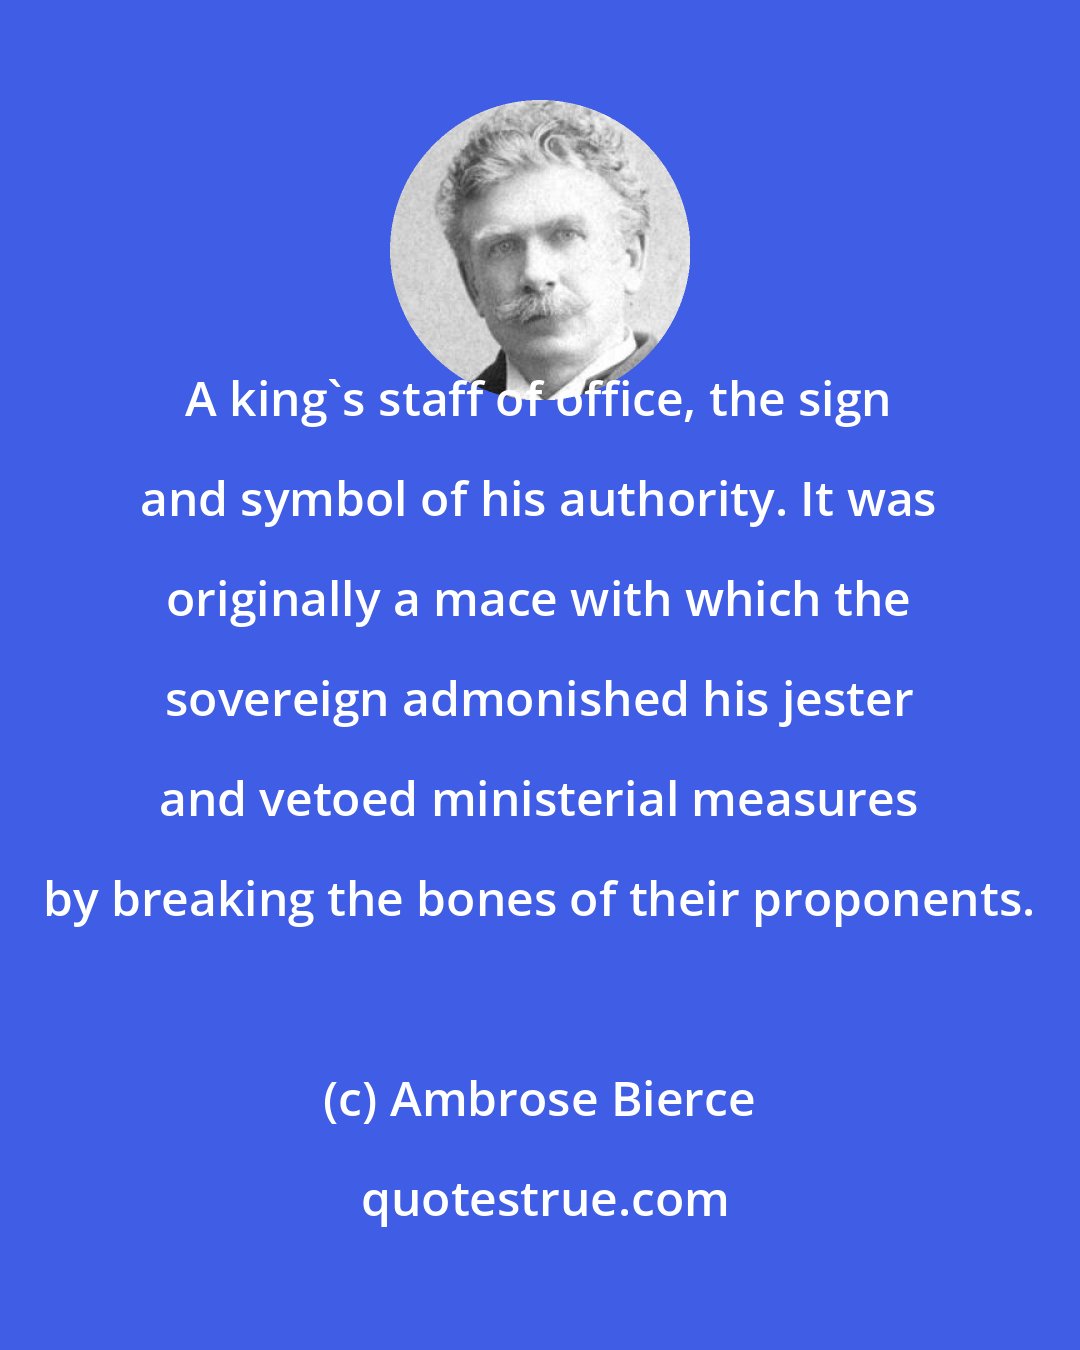 Ambrose Bierce: A king's staff of office, the sign and symbol of his authority. It was originally a mace with which the sovereign admonished his jester and vetoed ministerial measures by breaking the bones of their proponents.